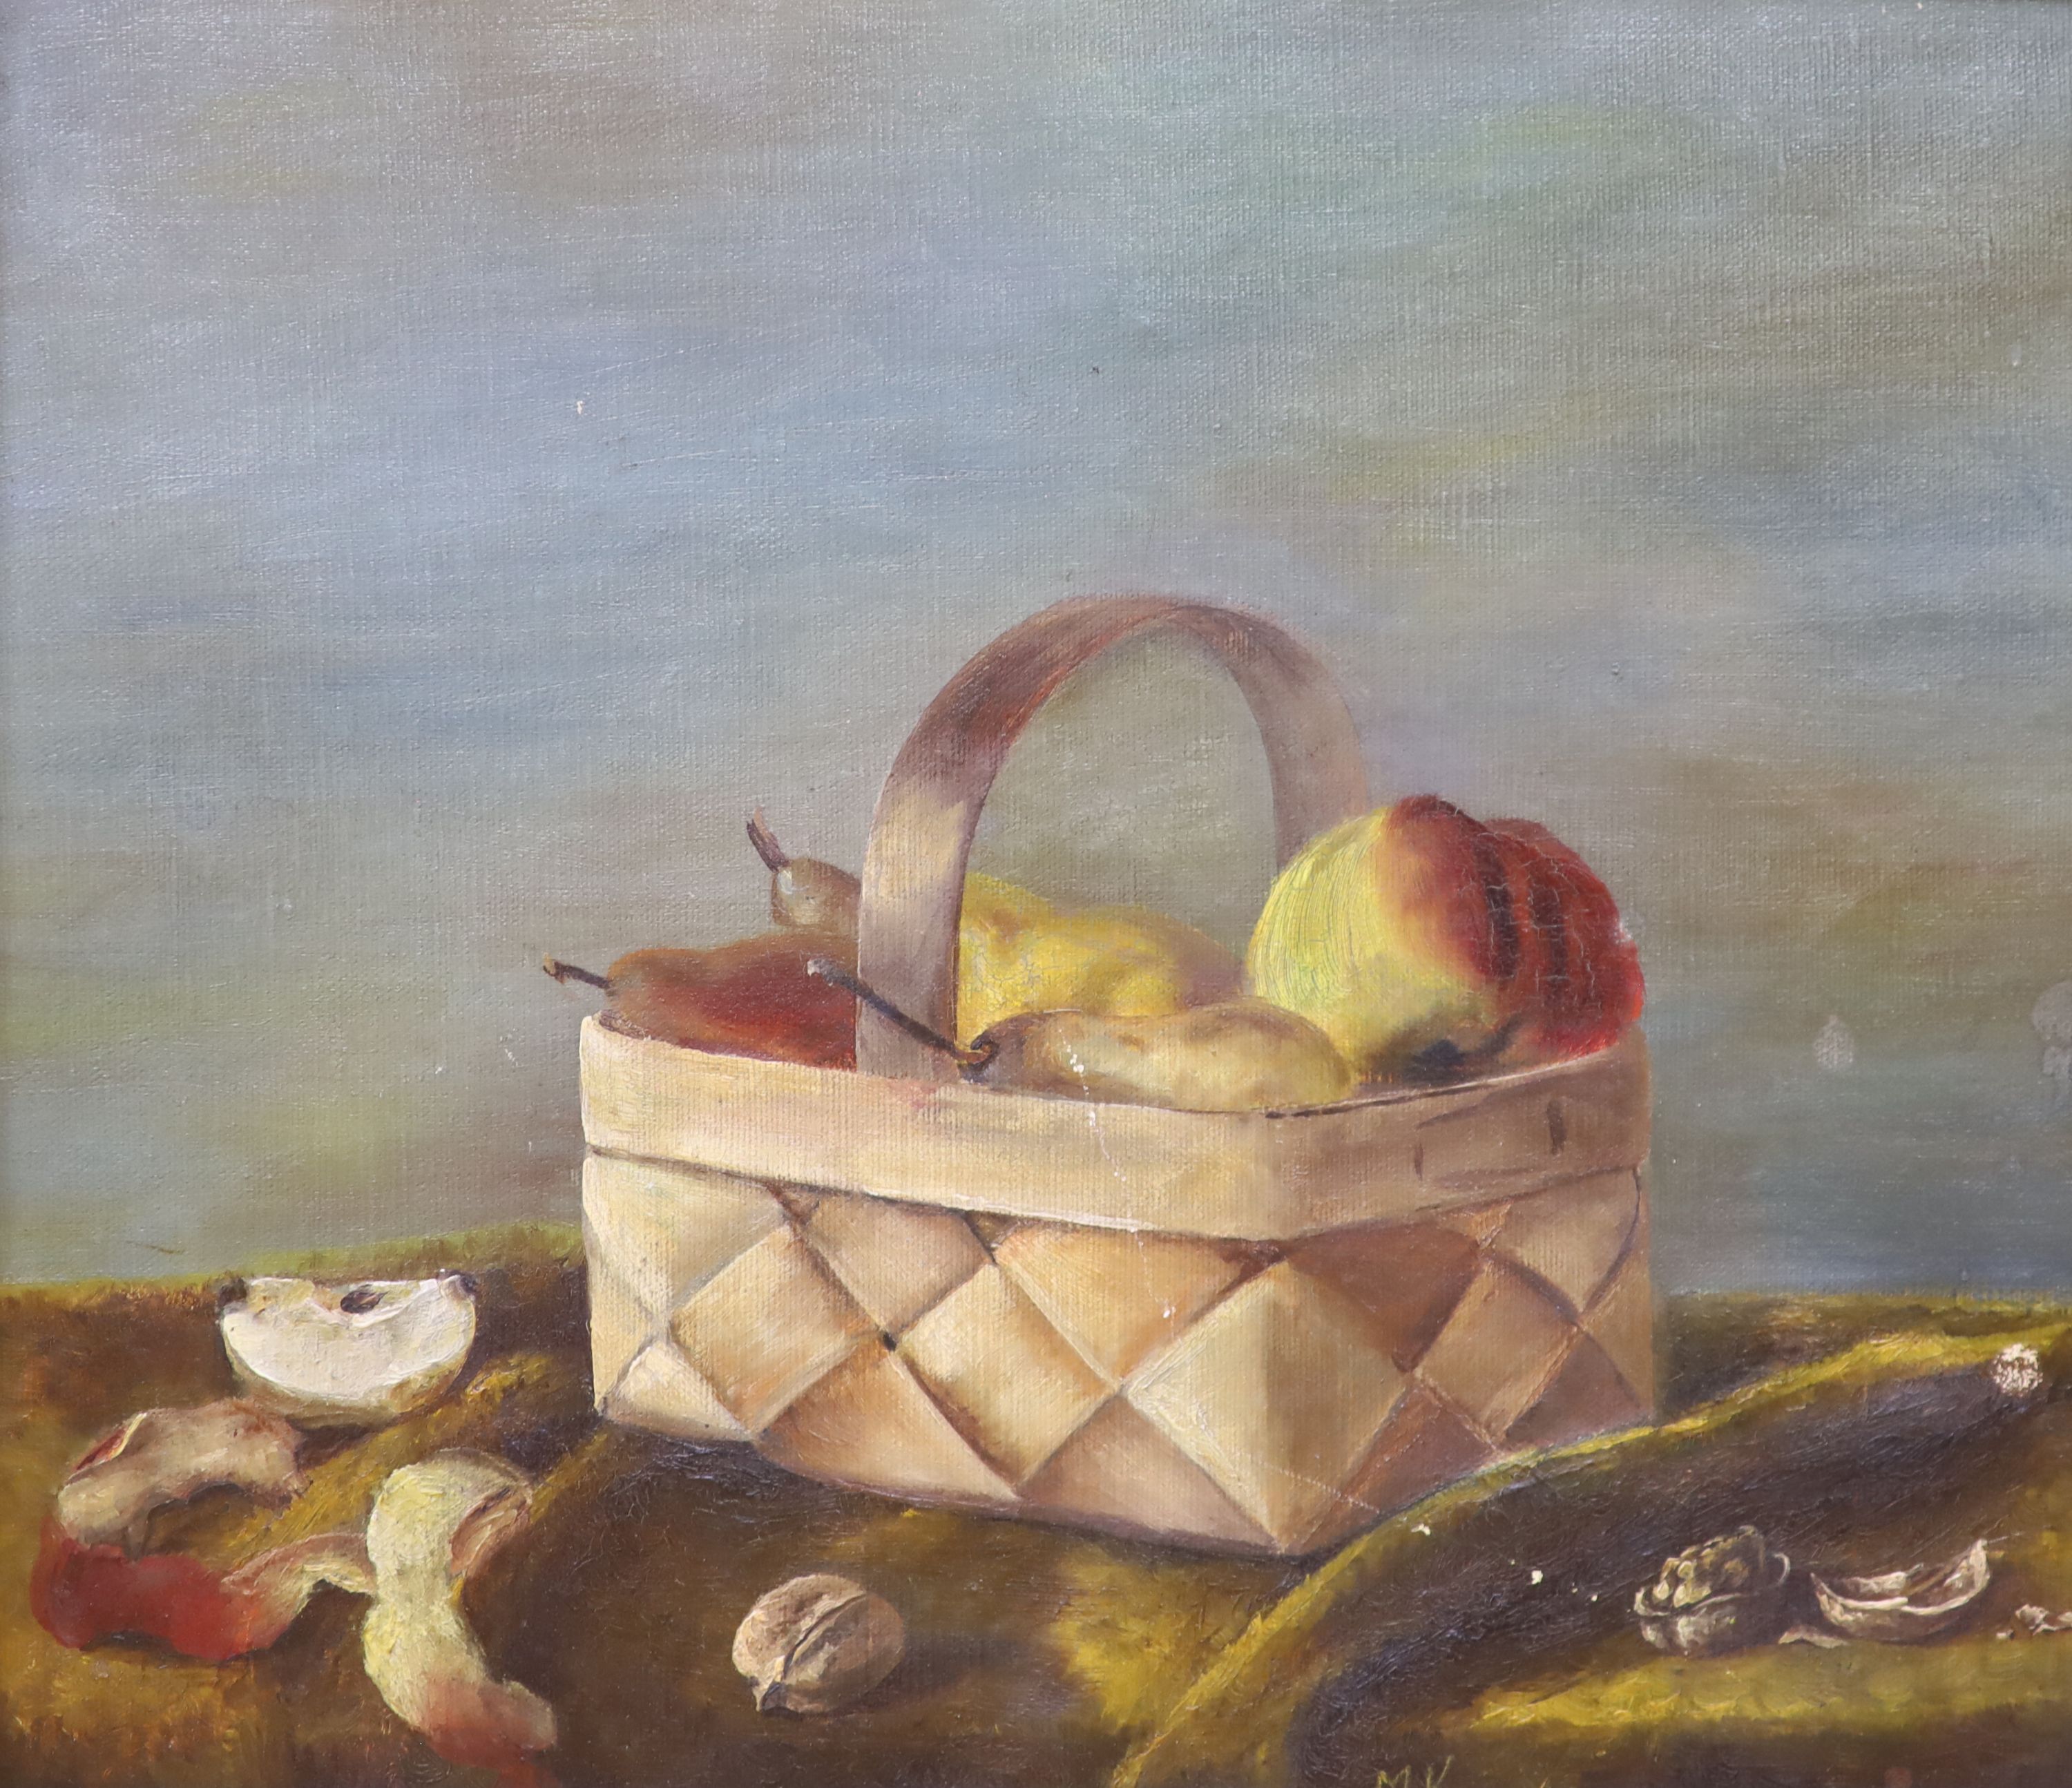 Early 20th century English School, oil on canvas, Still life of pears in a basket, initialled MK, 38 x 45cm